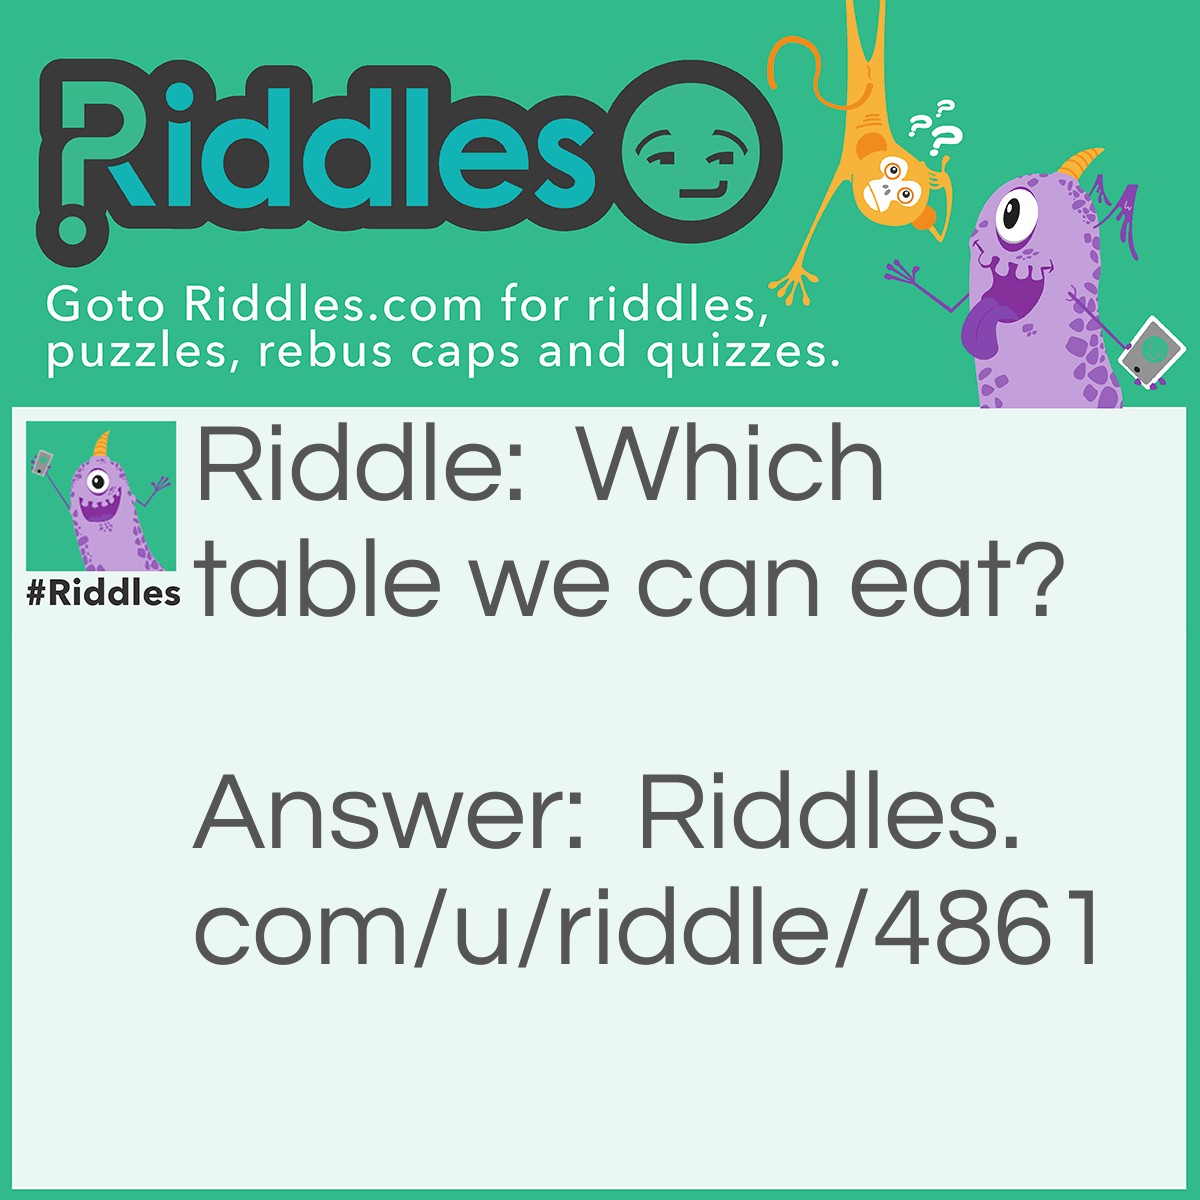 Riddle: Which table we can eat? Answer: A vegetable.